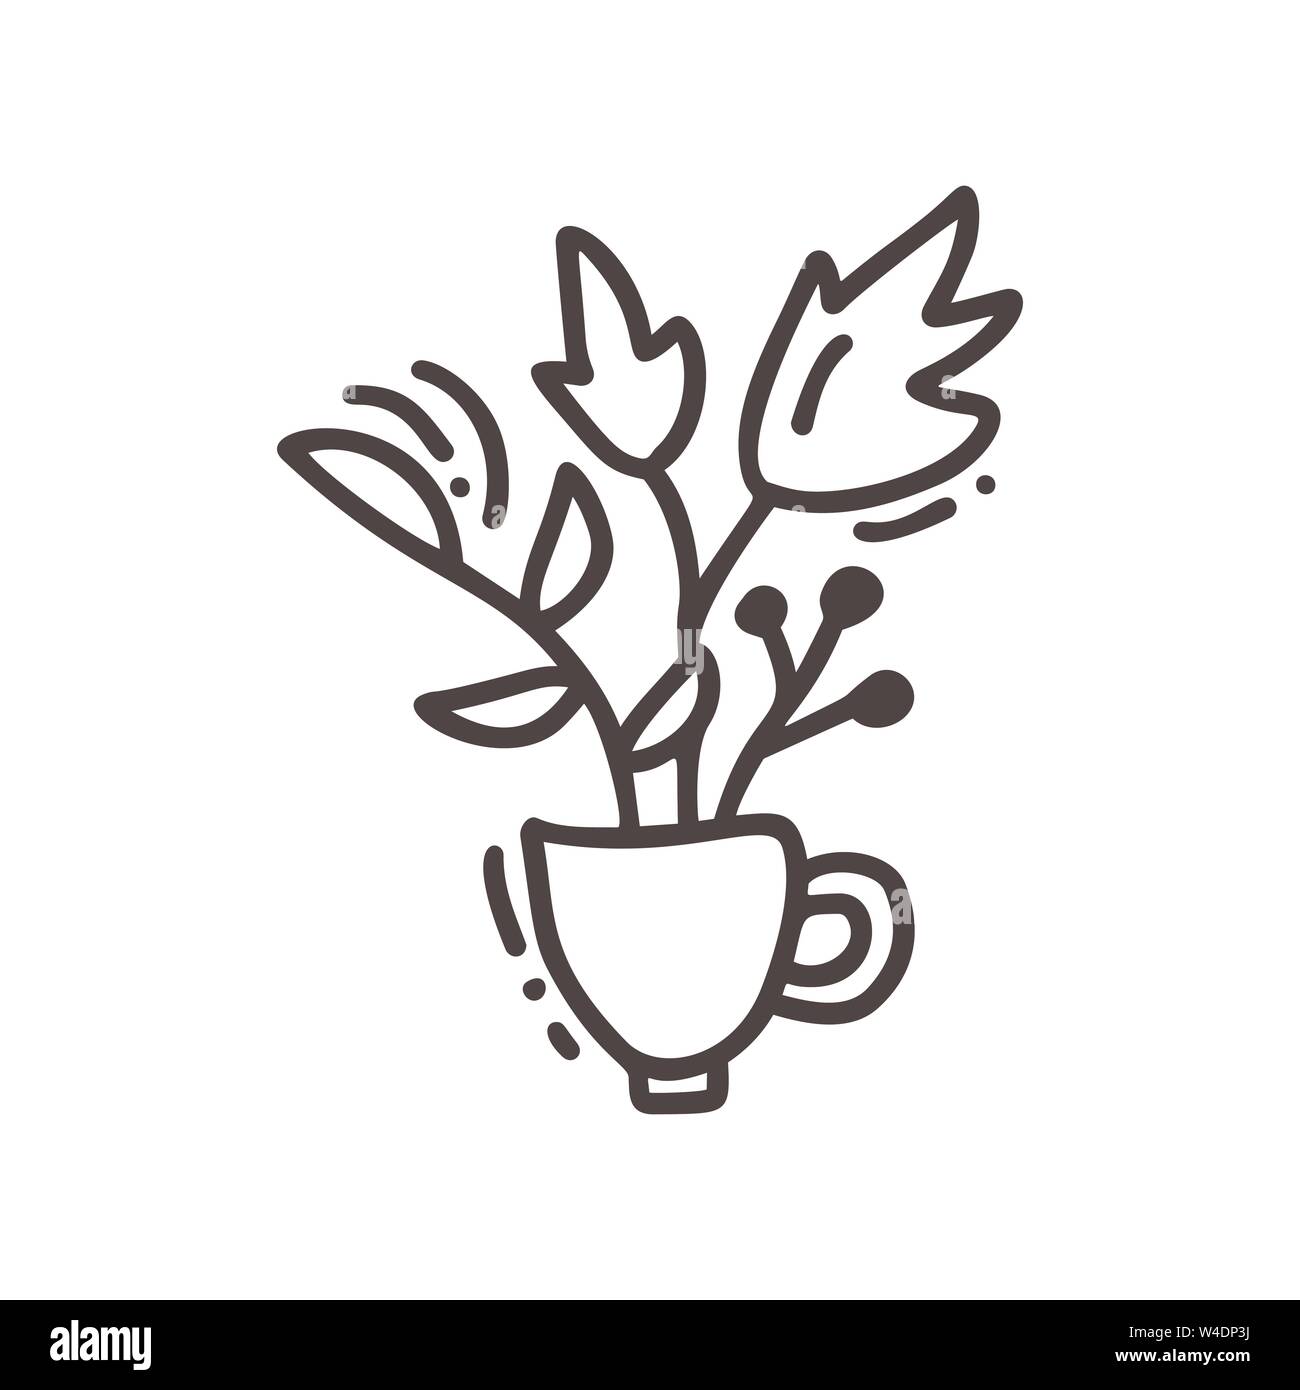 Hand drawn vector doodle illustration of tea cup. Mug icon line symbol. Monoline quality sketch art with leaves and berries Stock Vector